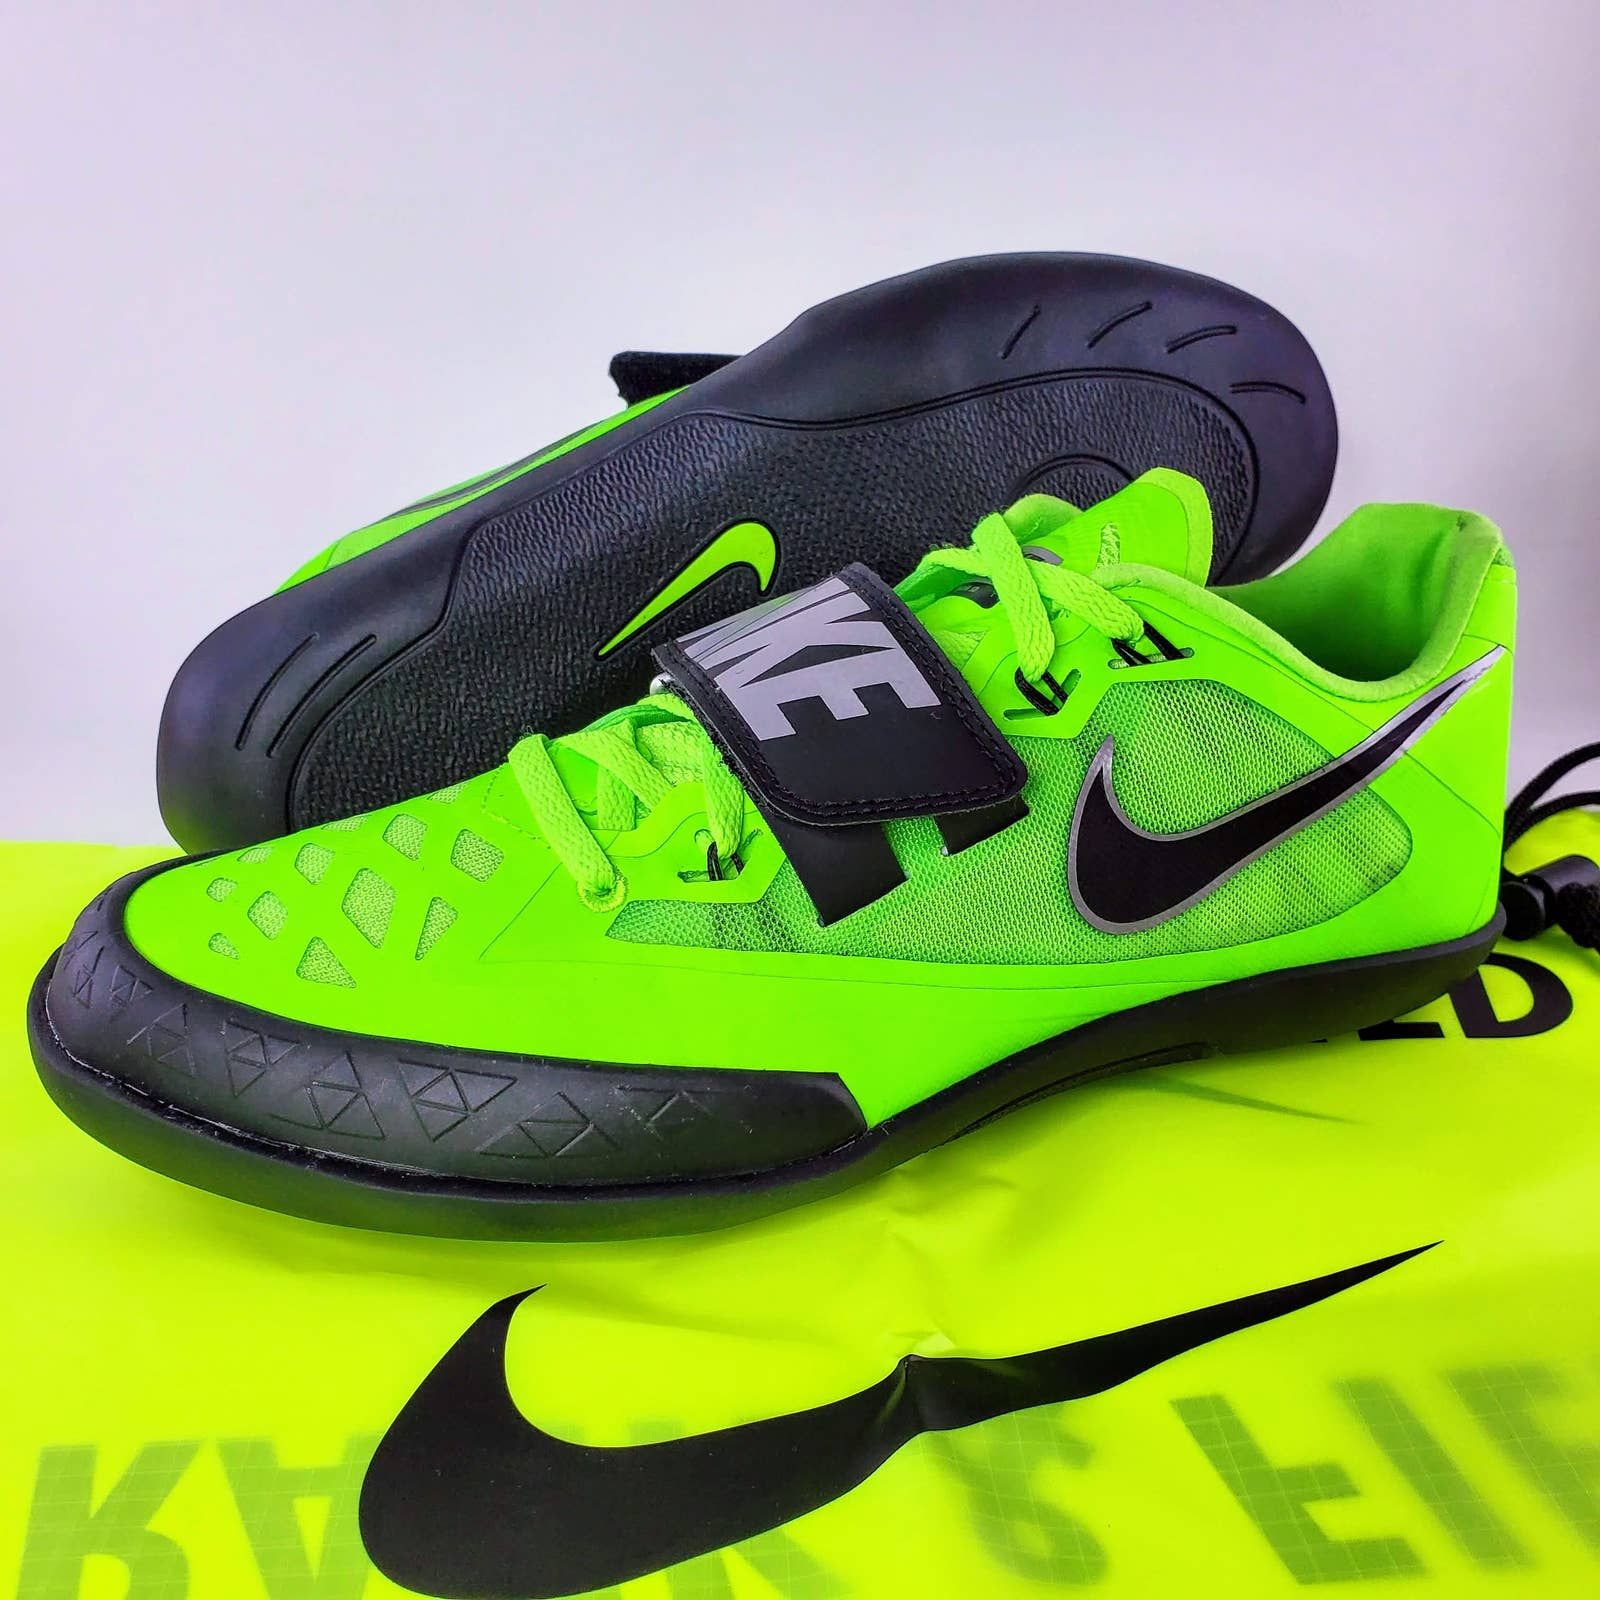 Nike NIKE Zoom Rival SD 4 Shoes Green Sizes 6.5, 7.5, 9.5, 12.5 Size US 9.5 / EU 42-43 - 1 Preview